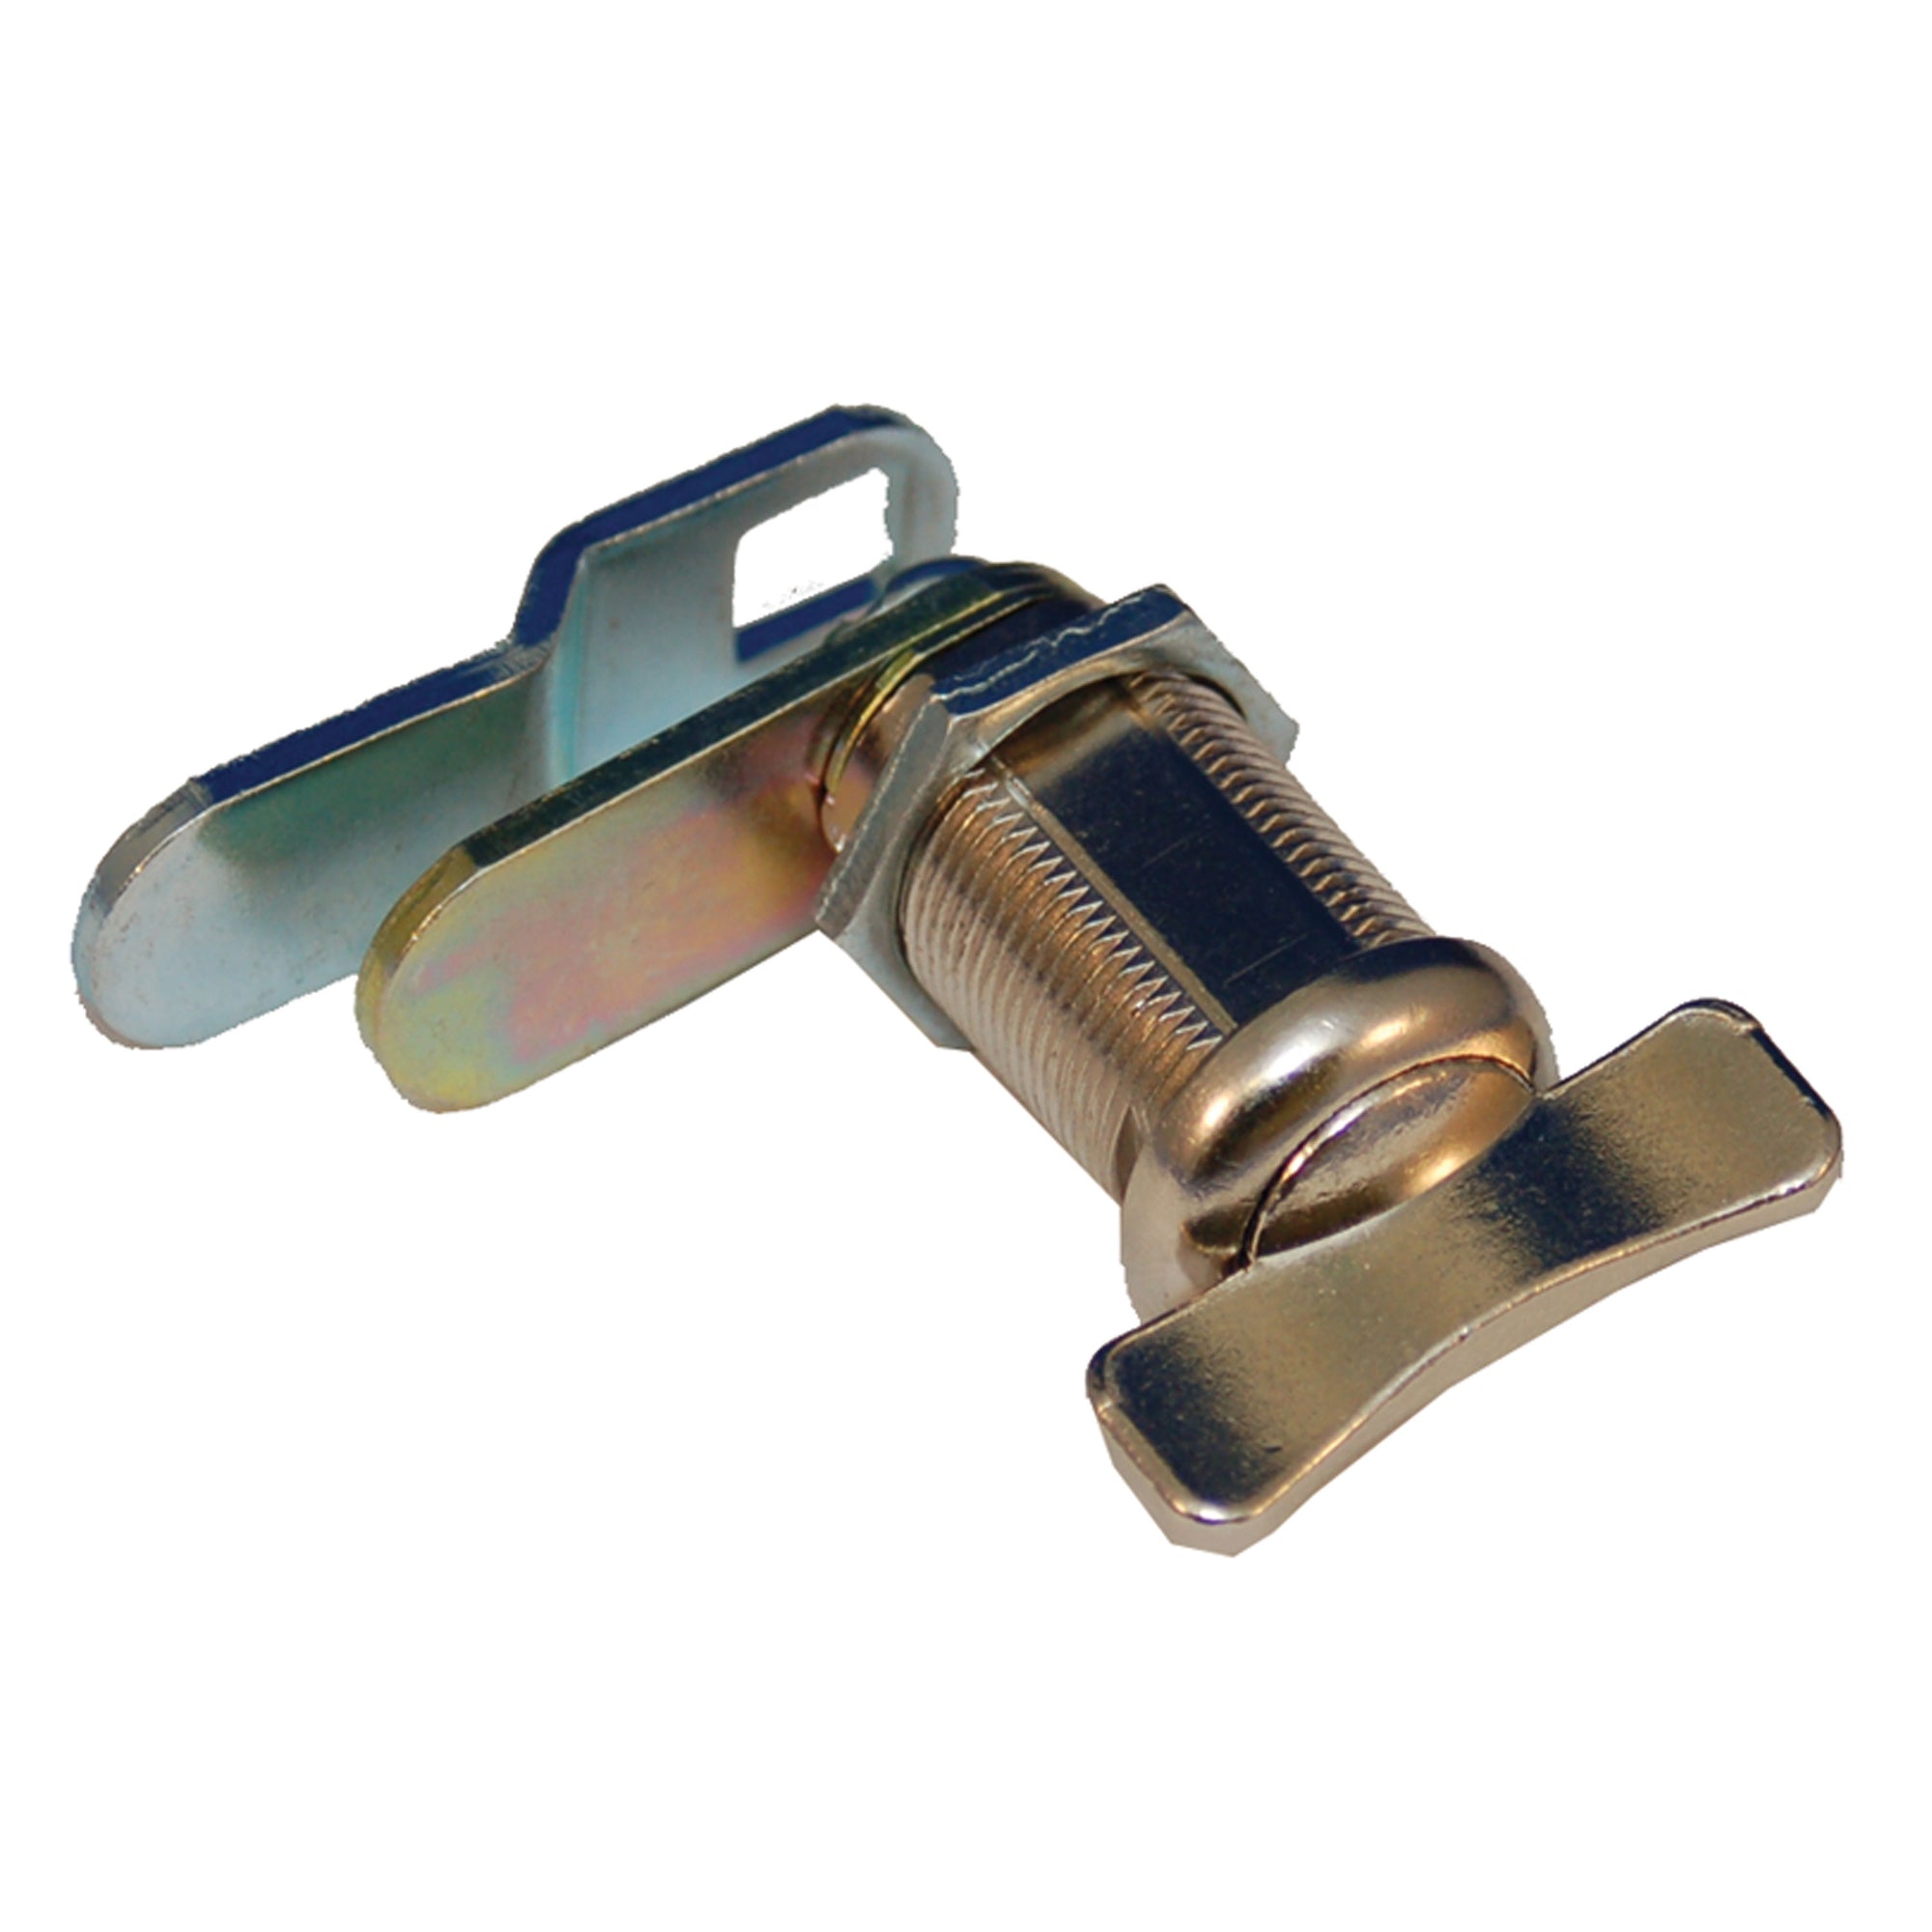 Prime Products 18-3069 Cam Lock 1-1/8" Thumb